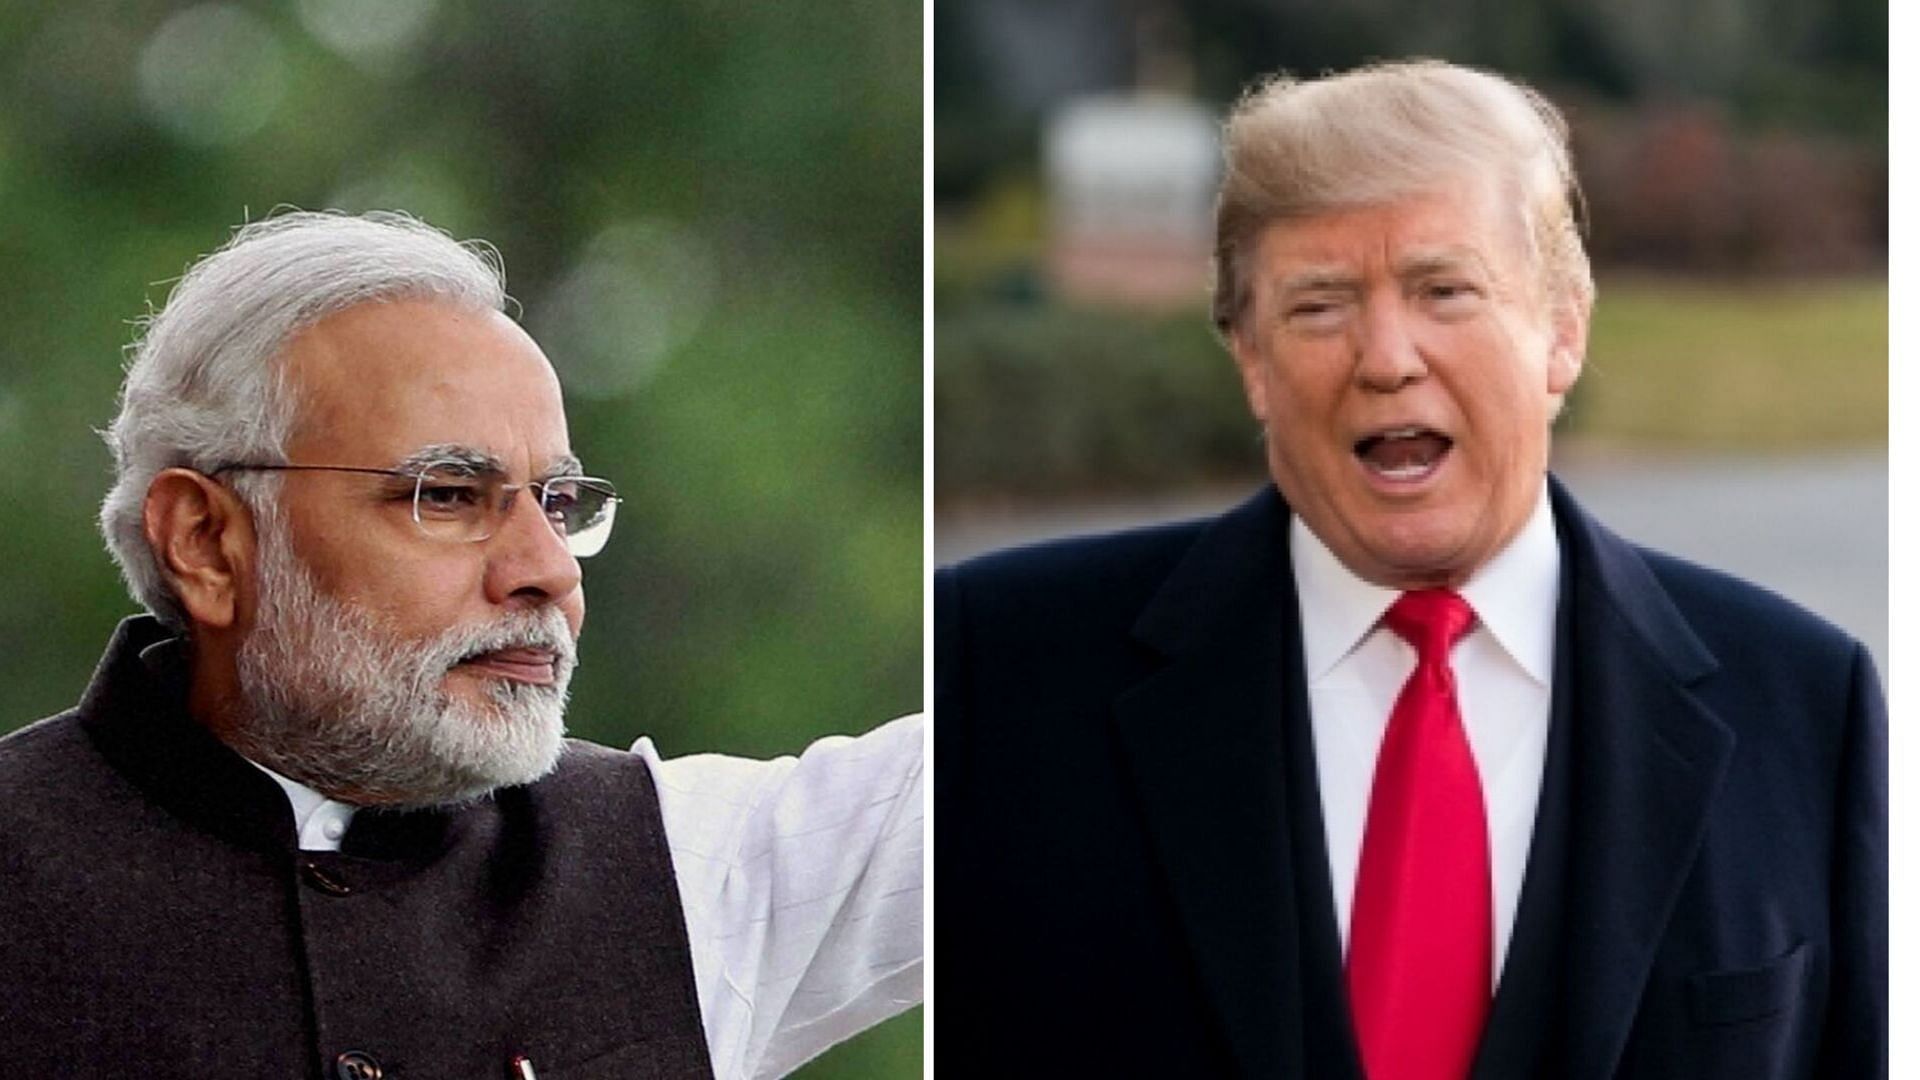 “They (India and China) were taking advantage of us for years and years”: Trump